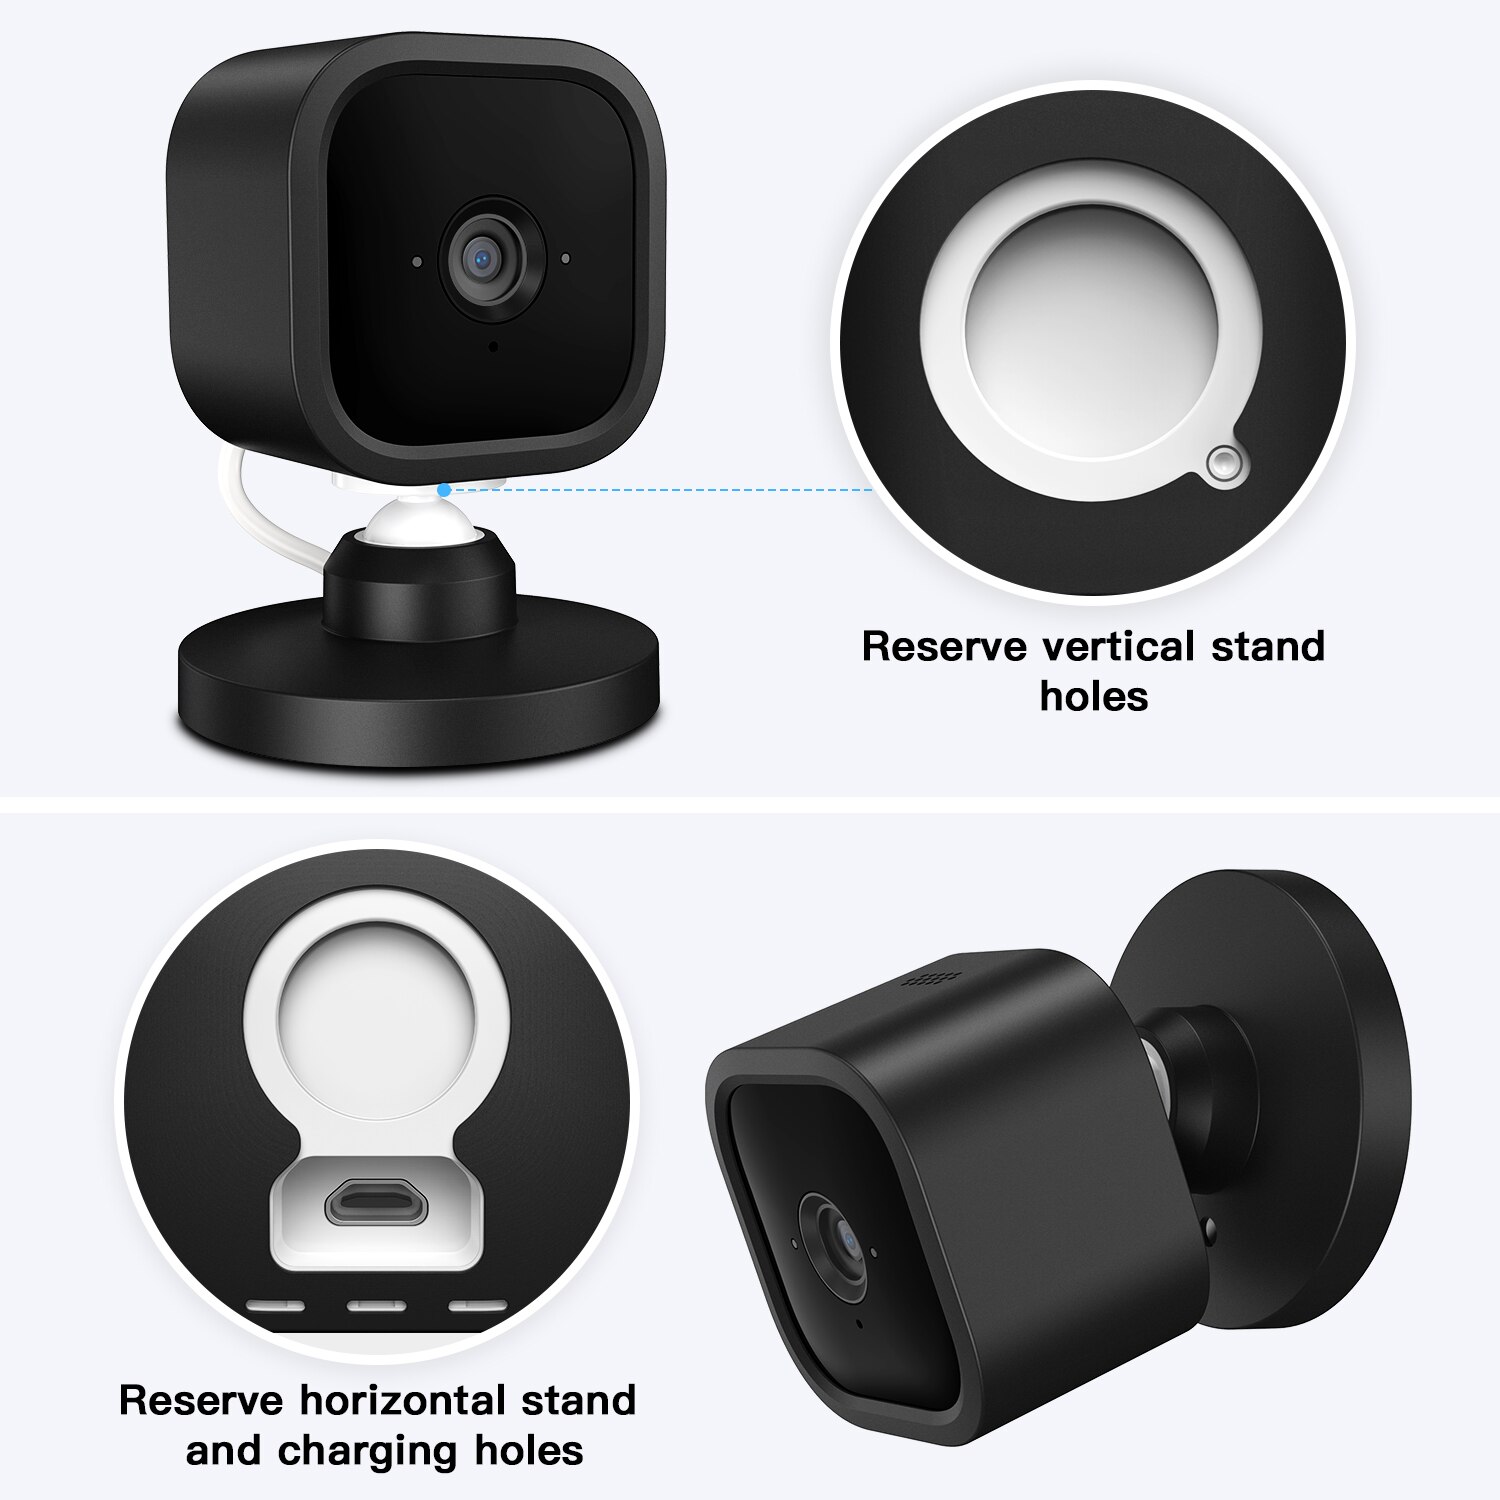 Blink Mini Camera Wall Mount Bracket Silicone Protective Covers Indoor/Outdoor Wall Mount Security Cover for Blink Mini Camera